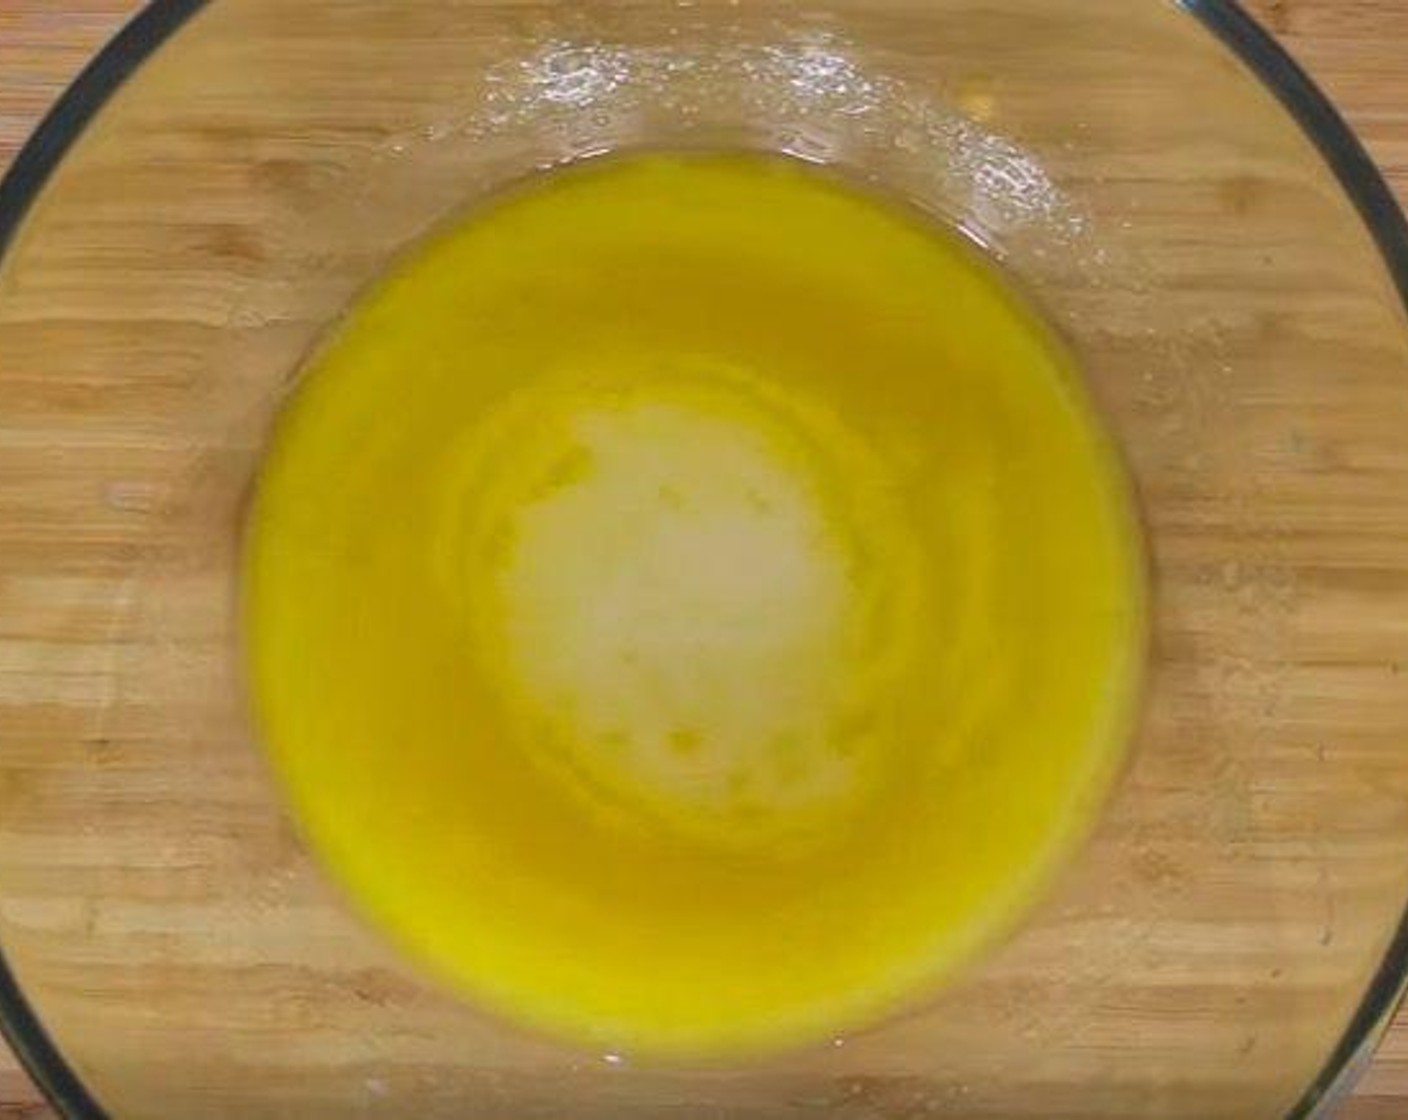 step 1 In a large mixing bowl, add Water (1 cup), Active Dry Yeast (1 1/2 Tbsp), Granulated Sugar (1 Tbsp), Salt (1/2 Tbsp), and Olive Oil (1/4 cup). Stir, then let the mixture stand for 5 minutes.